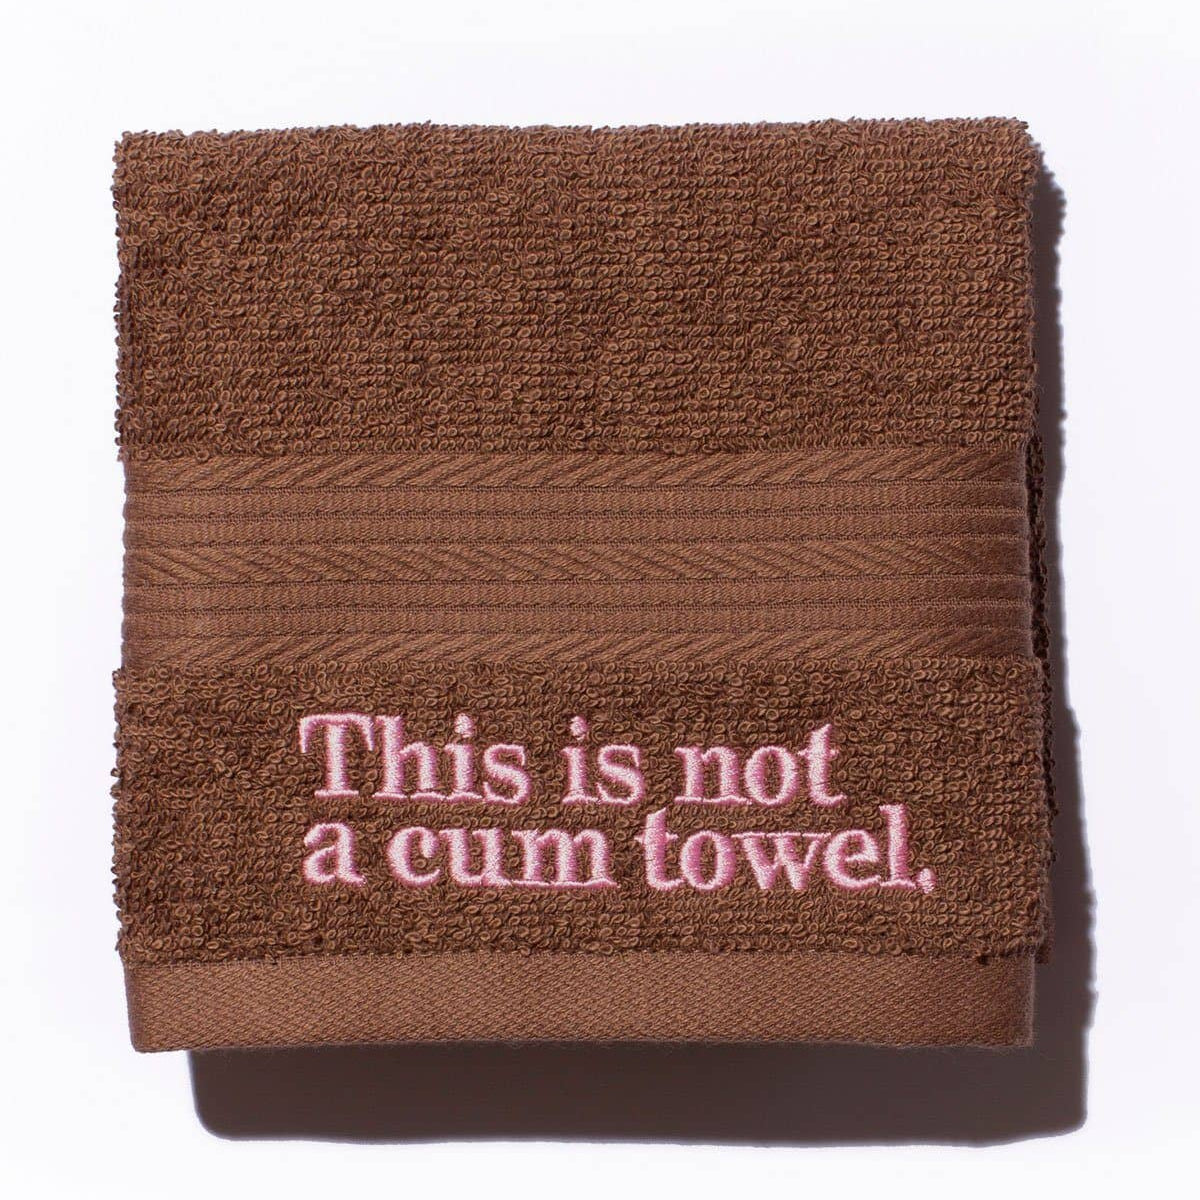 This is not a cum towel - Anese